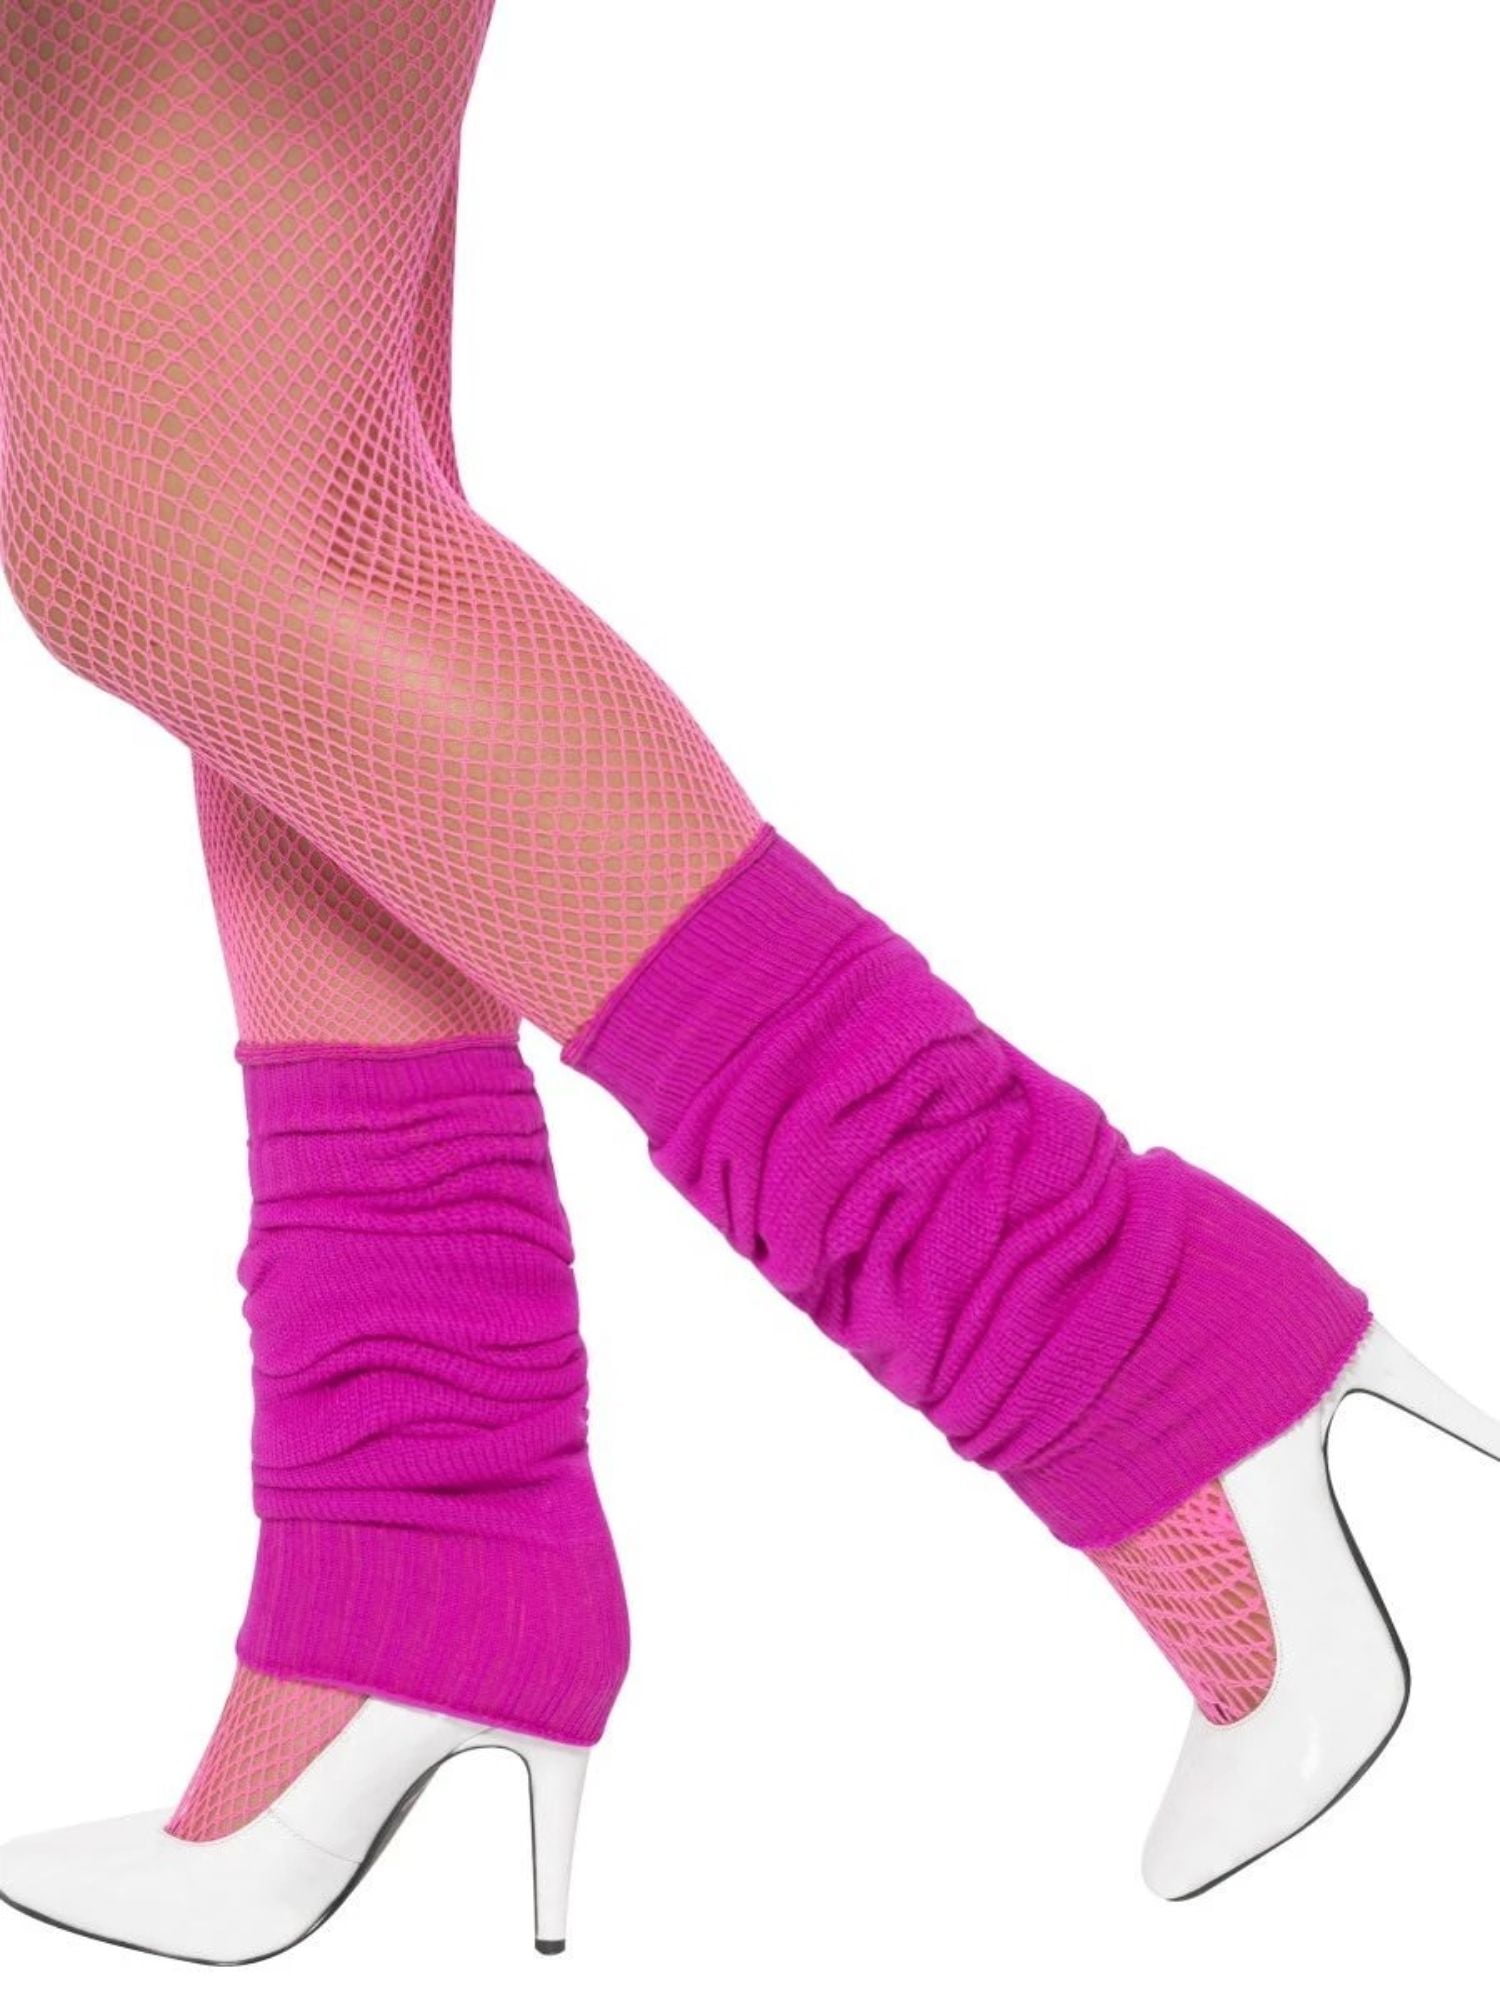 Ladies Womens Opaque Neon Full Foot Tights Fancy Dress Party Costume Accessory » 